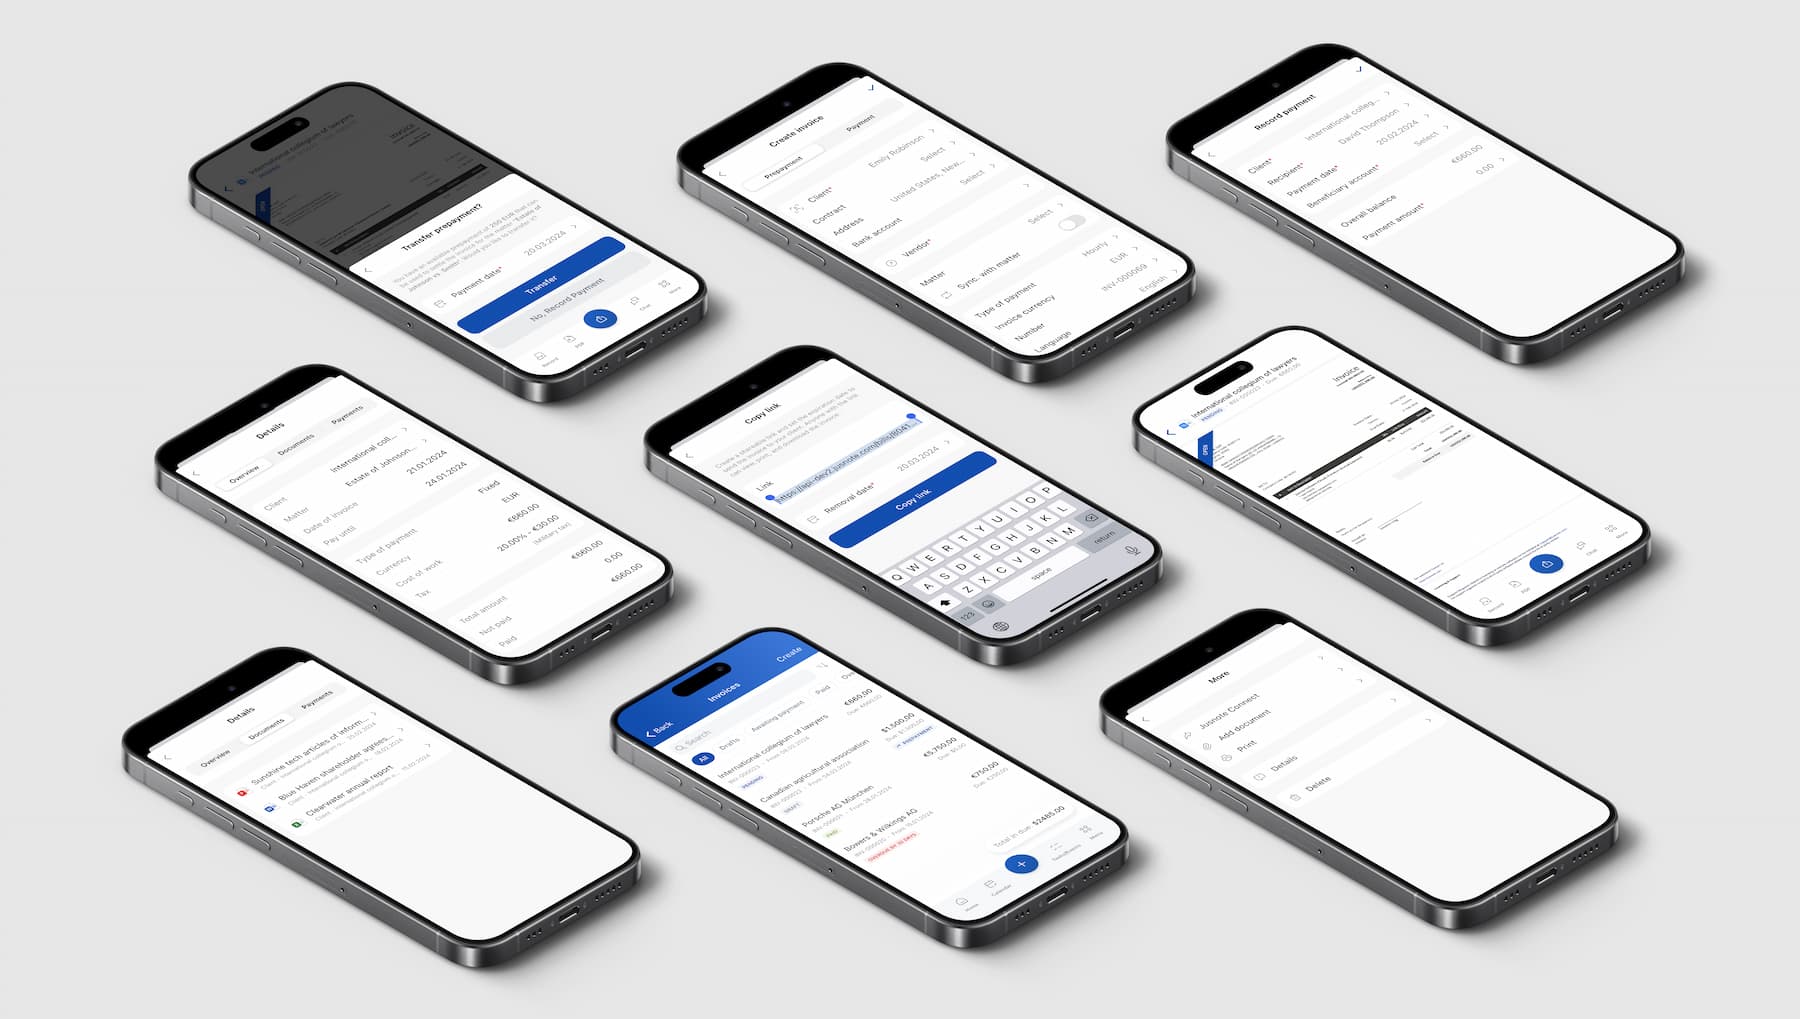 Jusnote will introduce a new invoicing module in its mobile application to allow lawyers to swiftly create, edit, manage, and send professional invoices to clients while on the go.